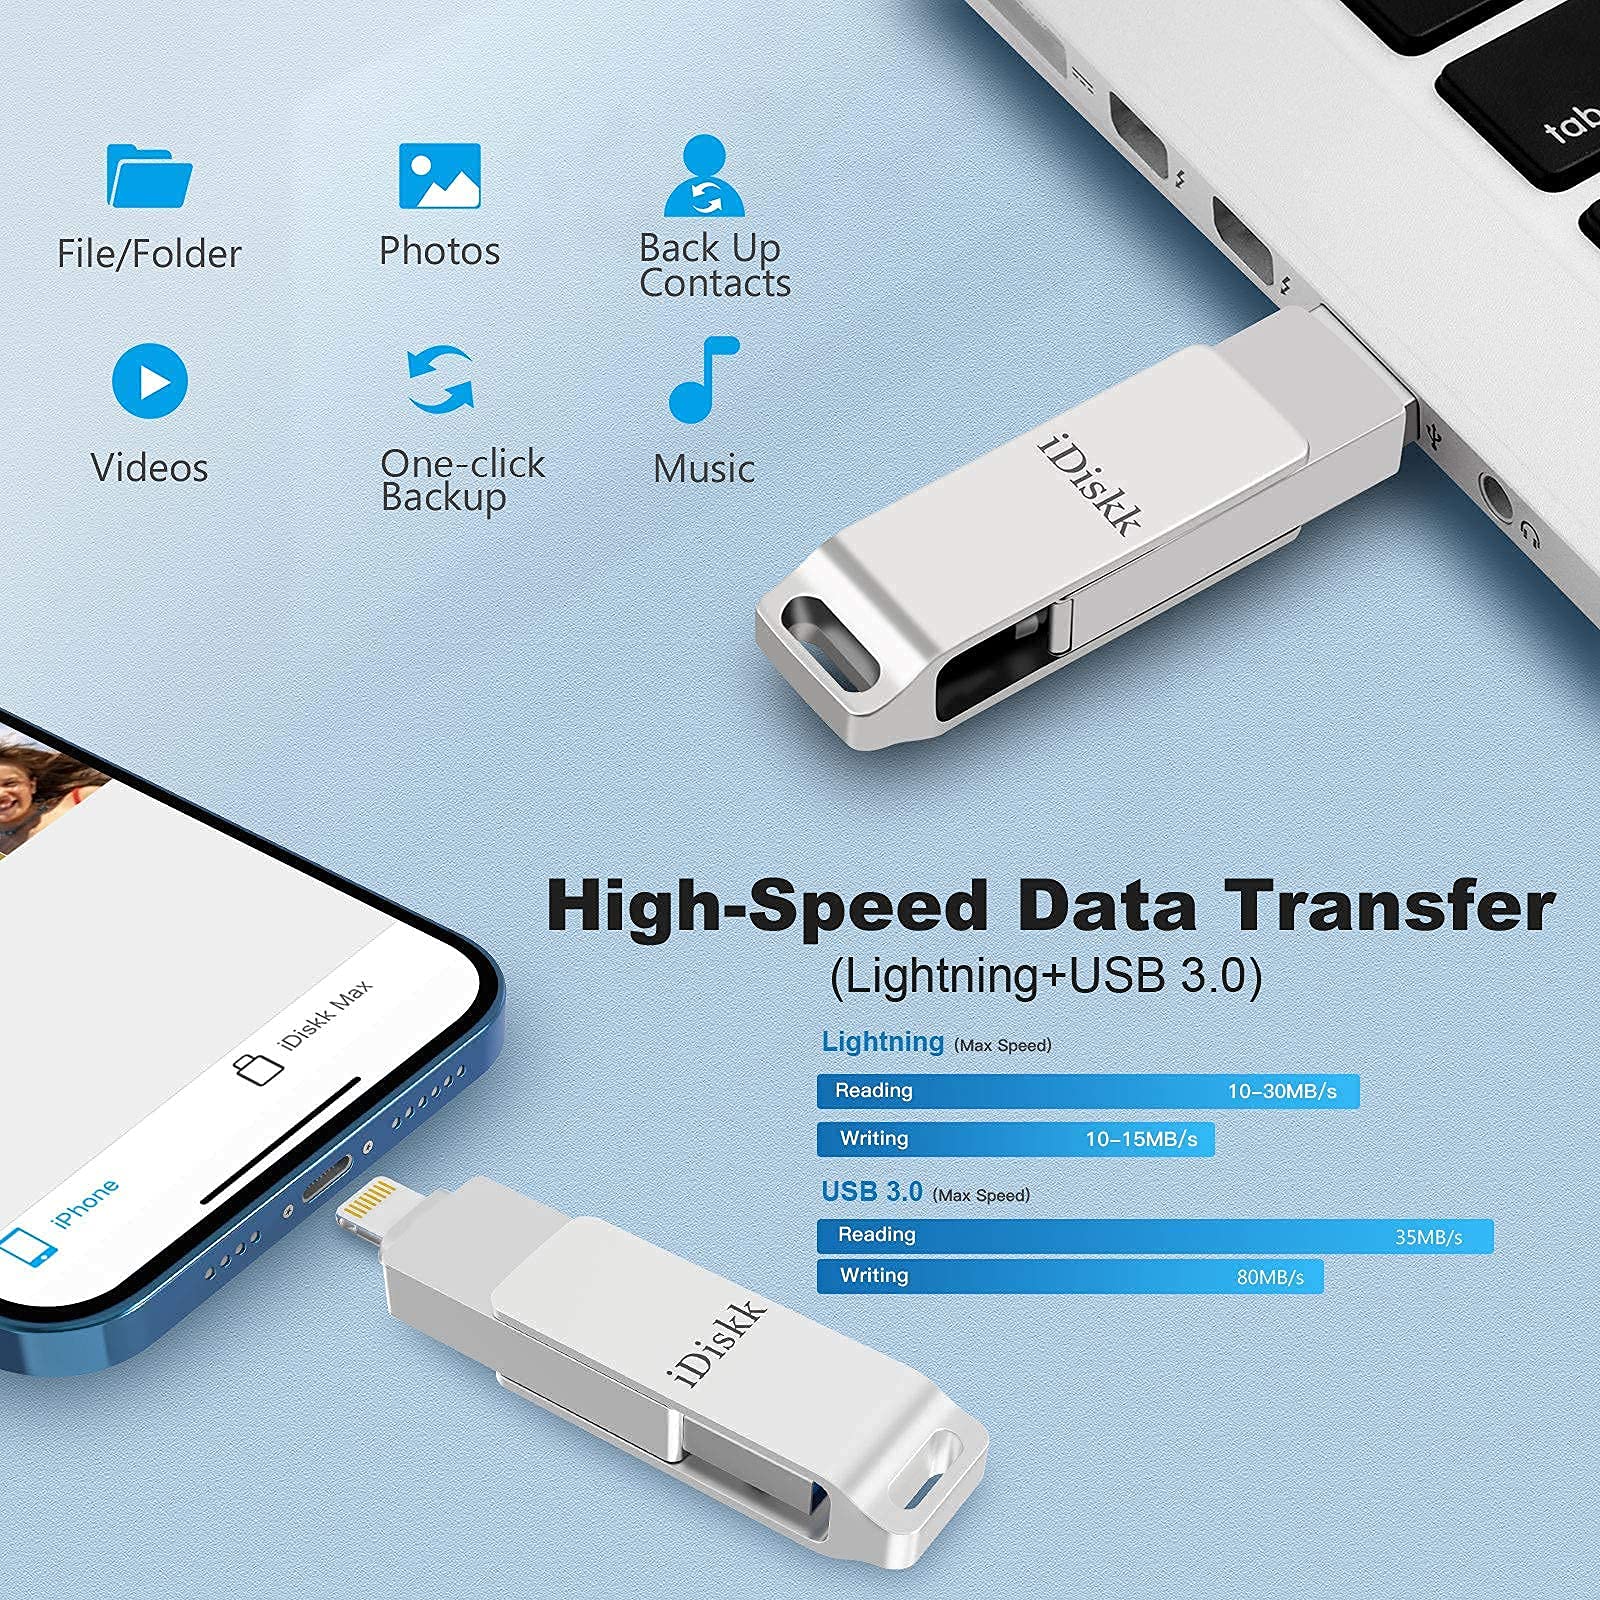 iDiskk 128GB Photo Stick for iPhone MFi Certified lightning USB stick for iPhone external memory stick iPhone storage work with iOS iPhone iPad Mac and PCs iPhone USB flash drive